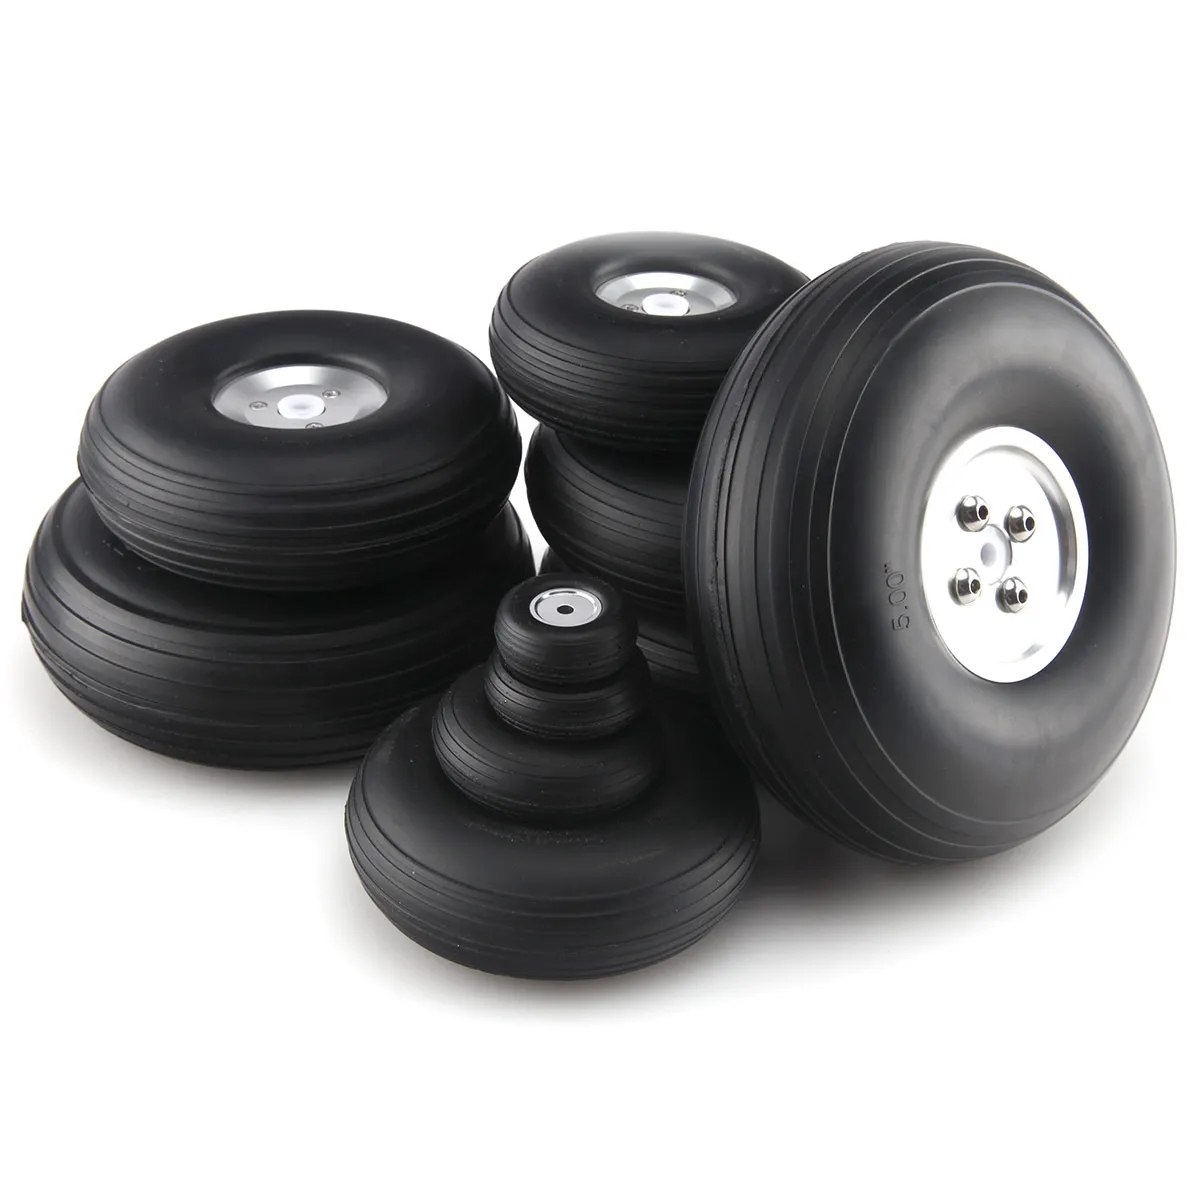 Details about   Tire and Wheel Sets for RC Car Airplane,PU Sponge Tire with Aluminum Hub,1.25"